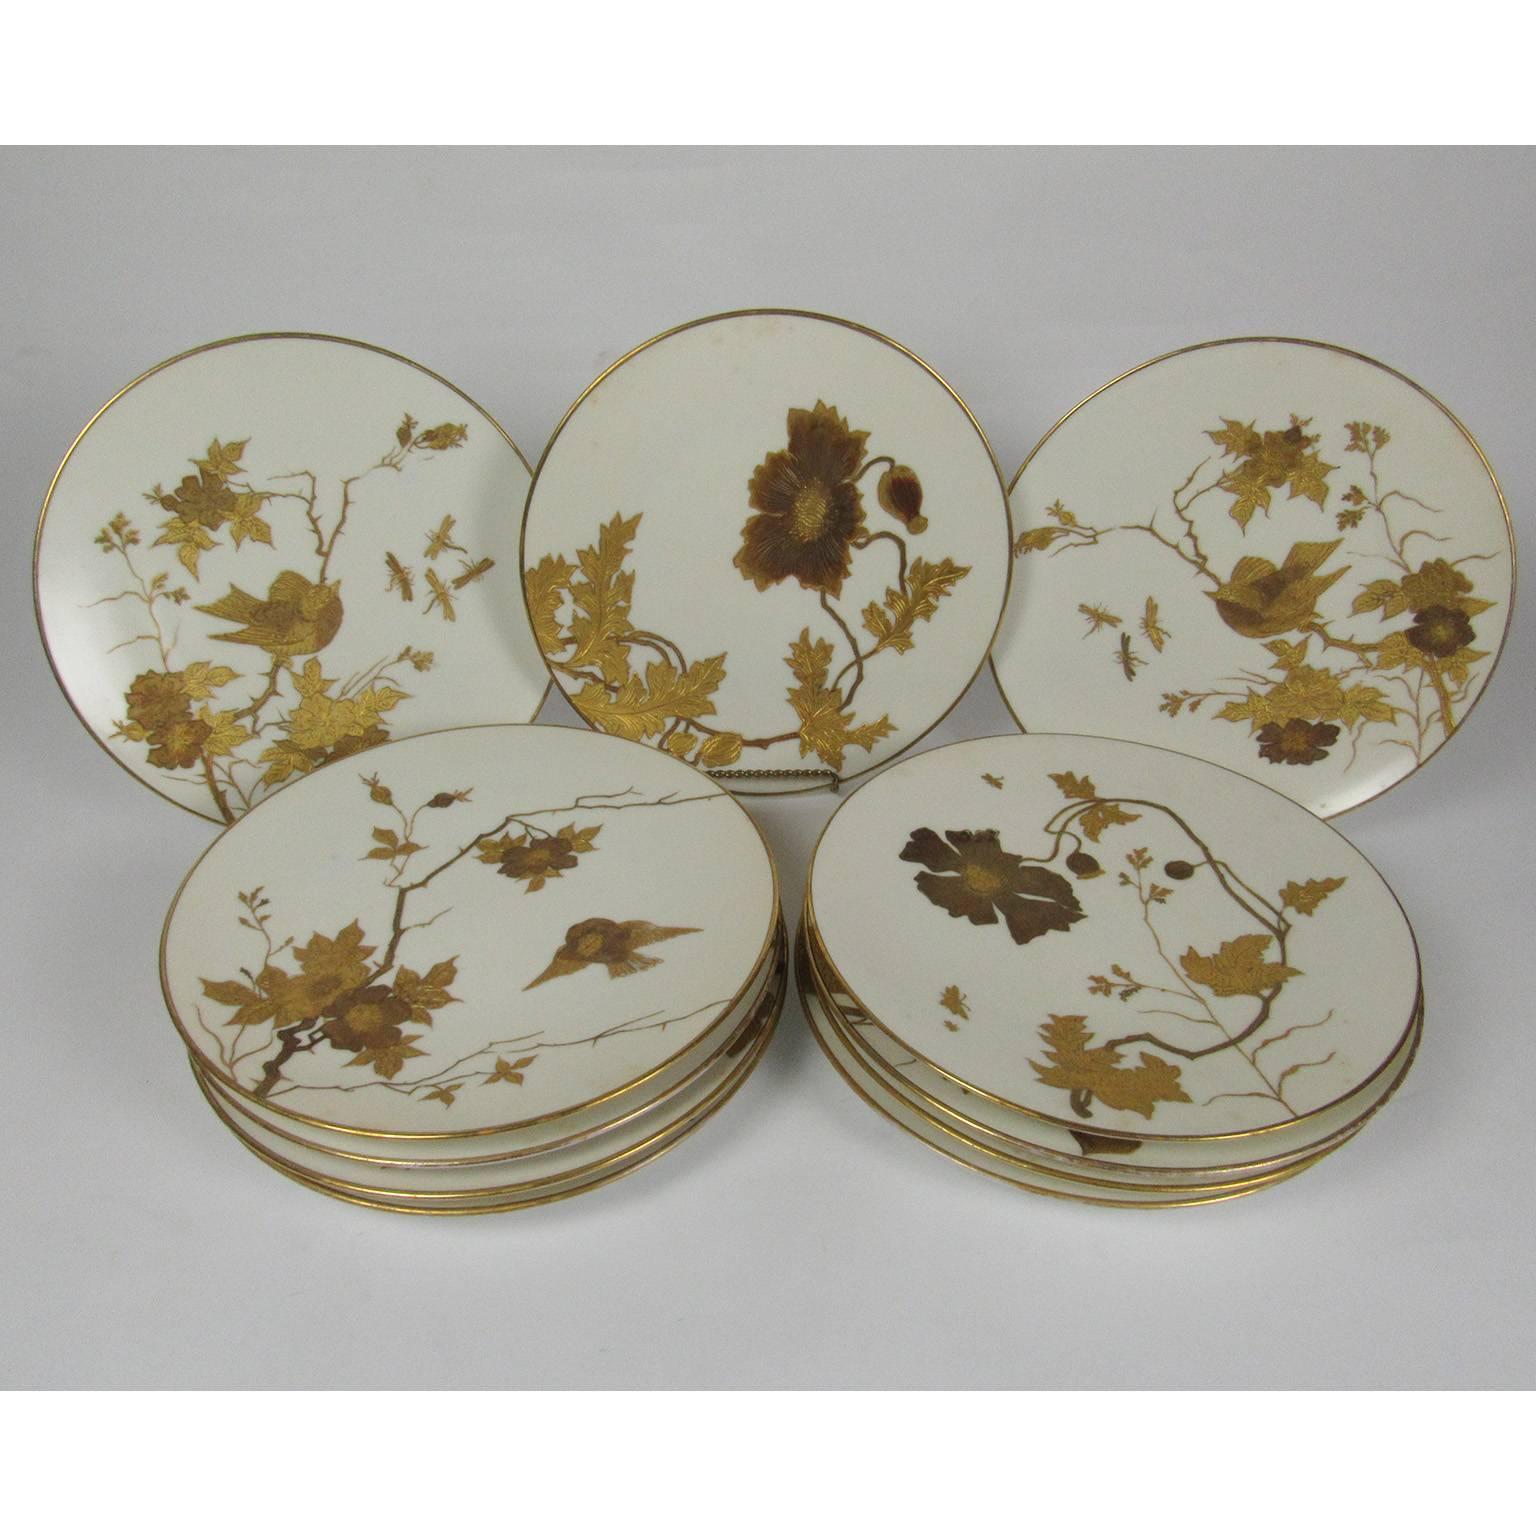 Set of 11 Fischer & Meig Pirkenhammer plates, Germany, late 19th century. Each plate with white ground and unique gilt bird and floral decoration. Measure: Diameter 9 inches.